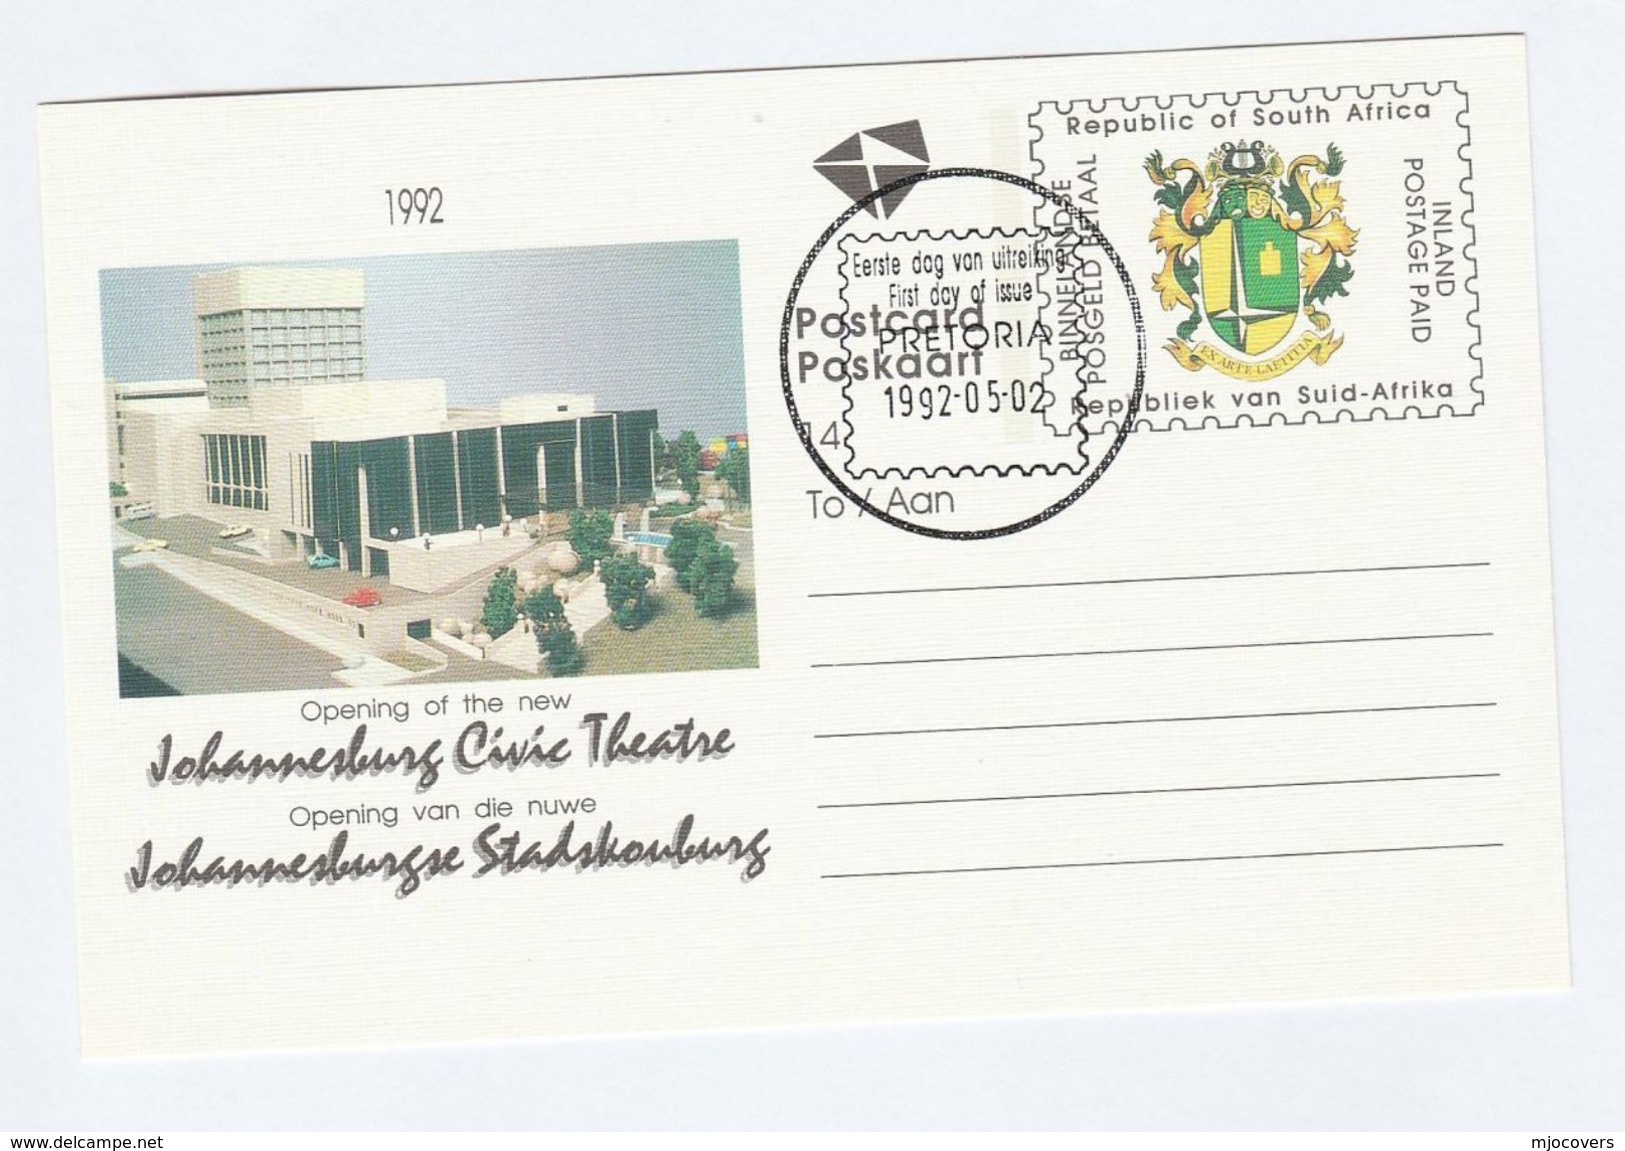 1992 SOUTH AFRICA STATIONERY Illus CIVIC THEATRE At JOHANNESBURG , FIRST DAY Rsa Stamps Postal Card Cover - Lettres & Documents